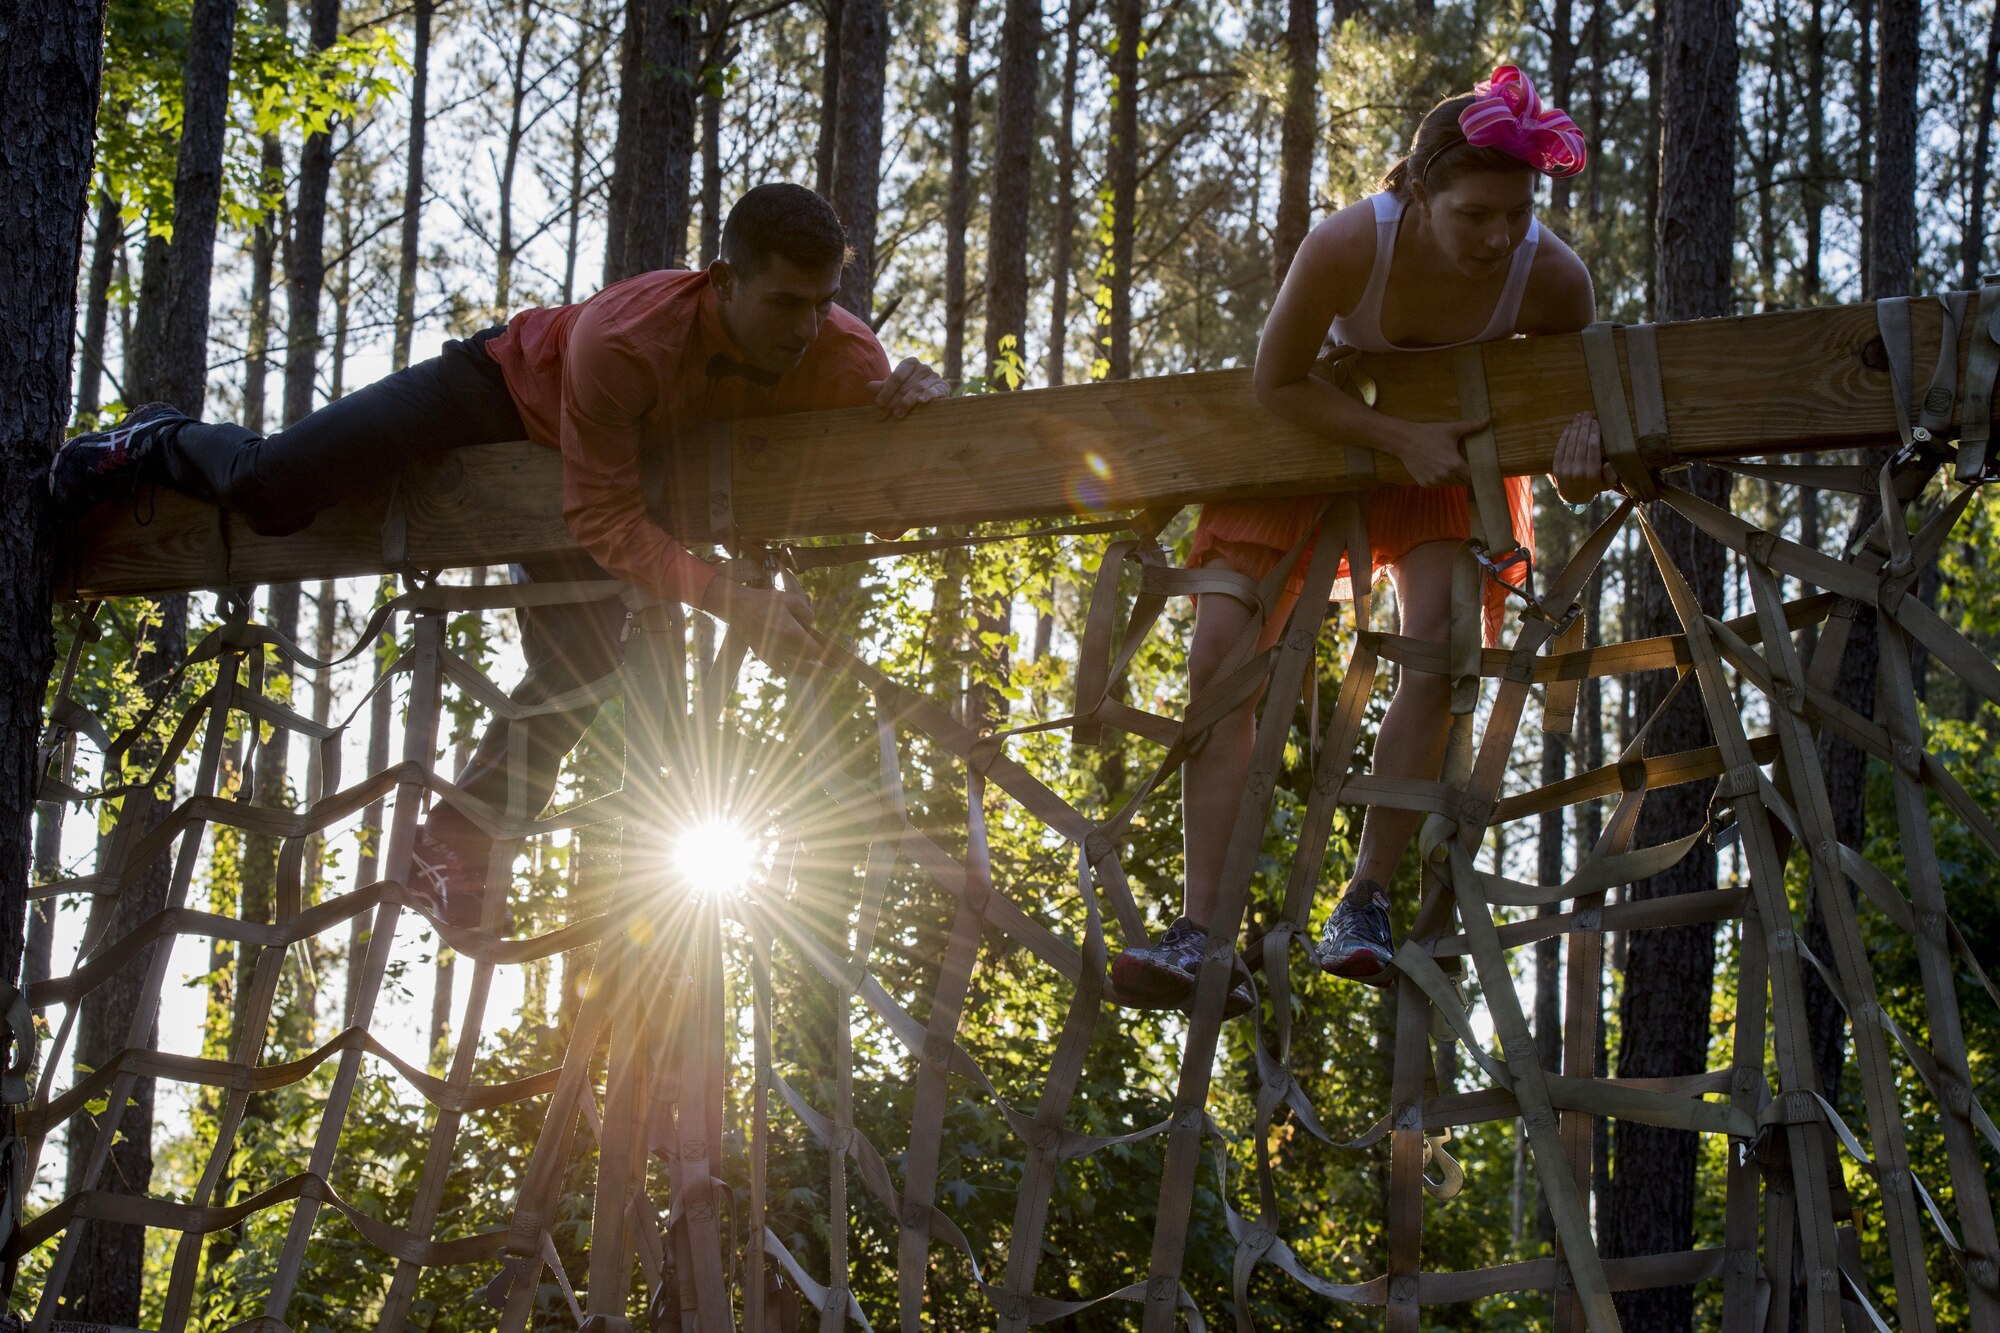 Participants maneuver themselves over a rope wall during the Moody Mud Run, May 6, 2017, in Ray City, Ga. The Fourth Annual Moody Mud consisted of both adult and child course that challenged more than 600 participants with obstacles over 4.2 miles. (U.S. Air Force photo by Staff Sgt. Eric Summers Jr.)